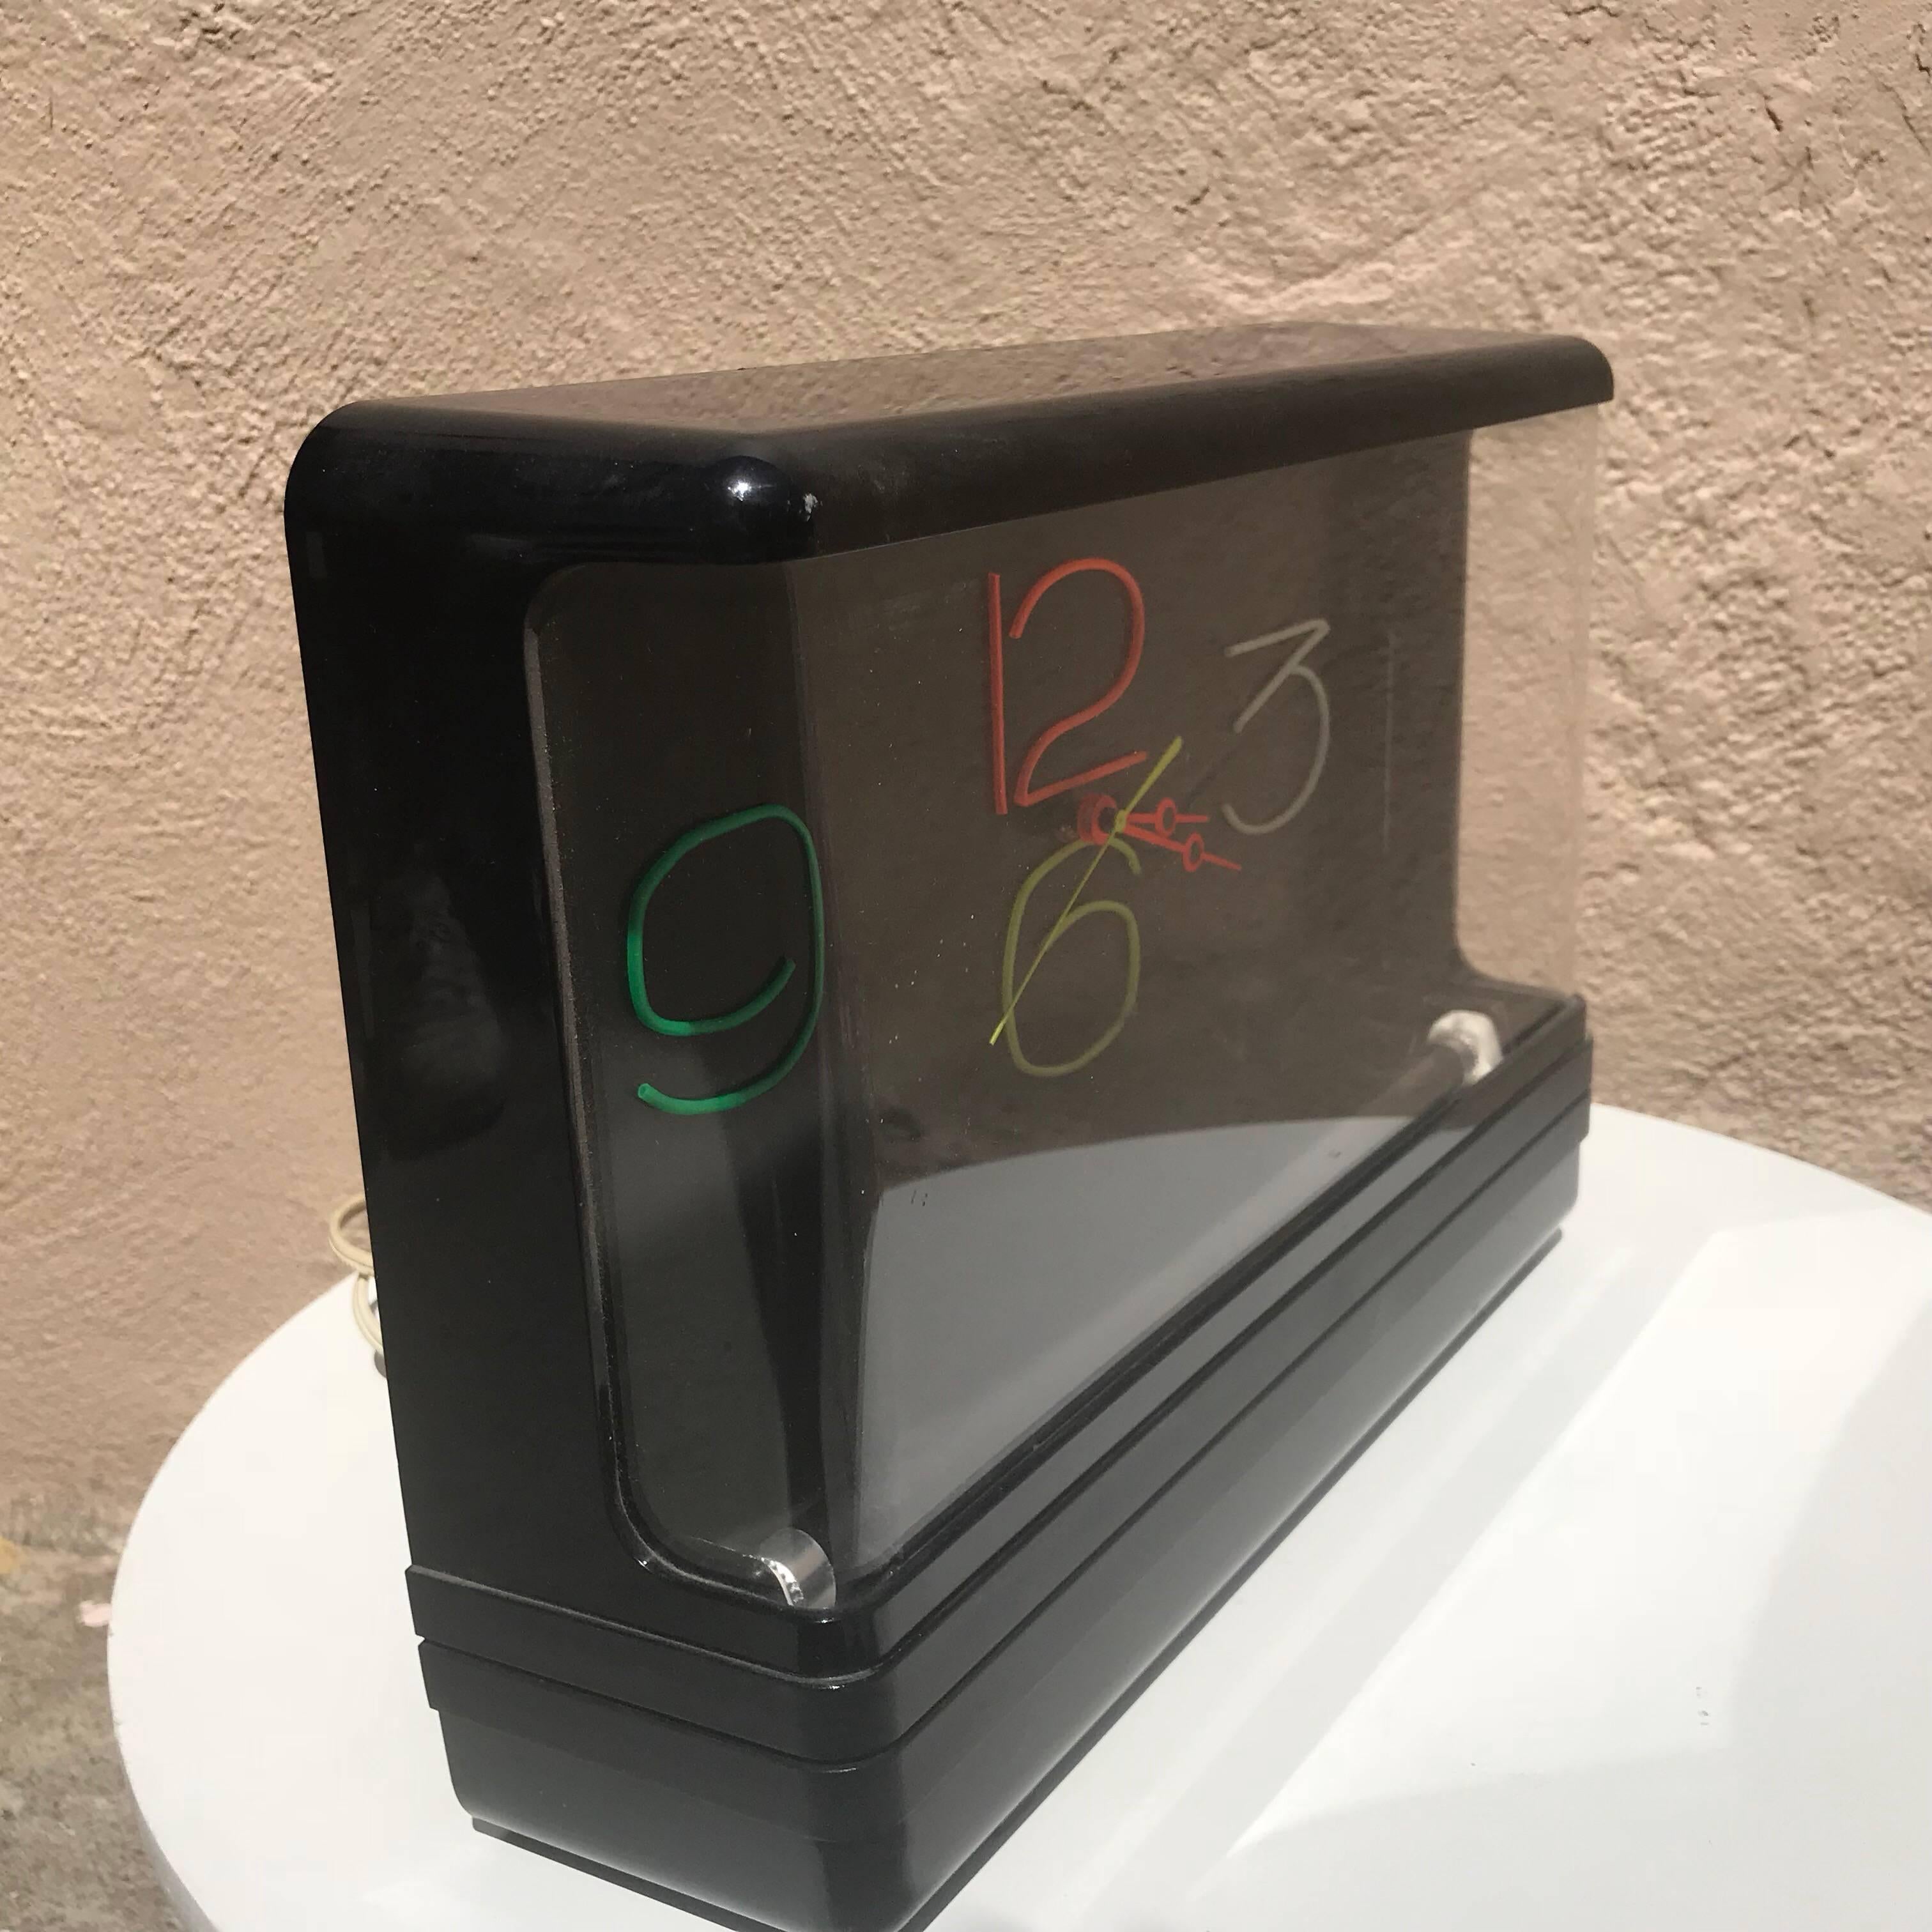 For your consideration, a Mid-Century Modern neon electric clock.
Dimensions: 9 1/2